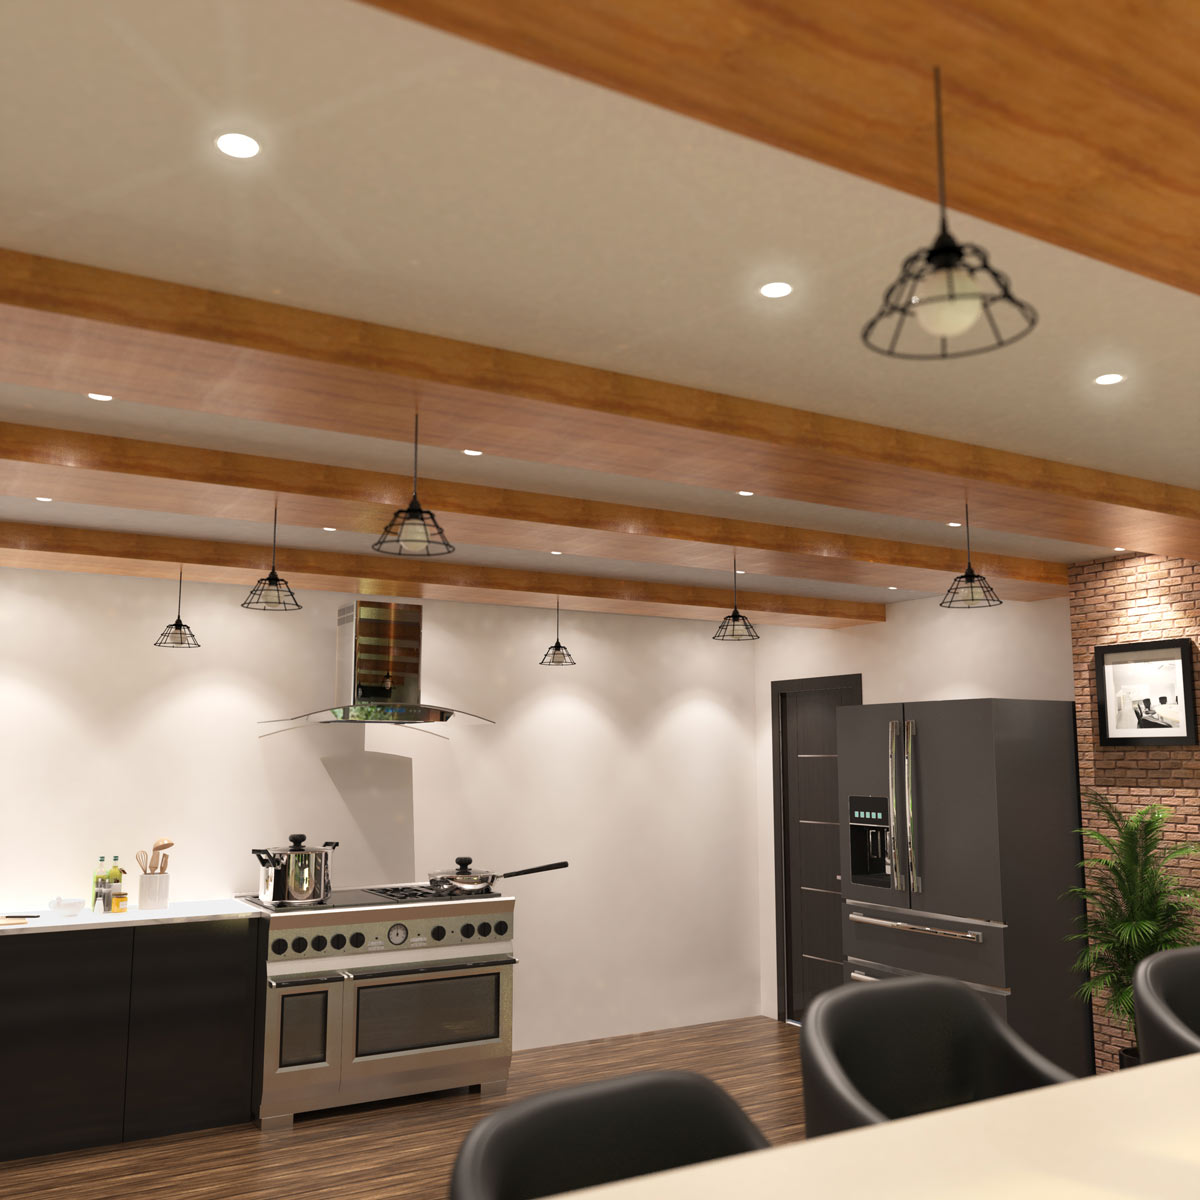 kitchen and dining room with wood ceiling beams